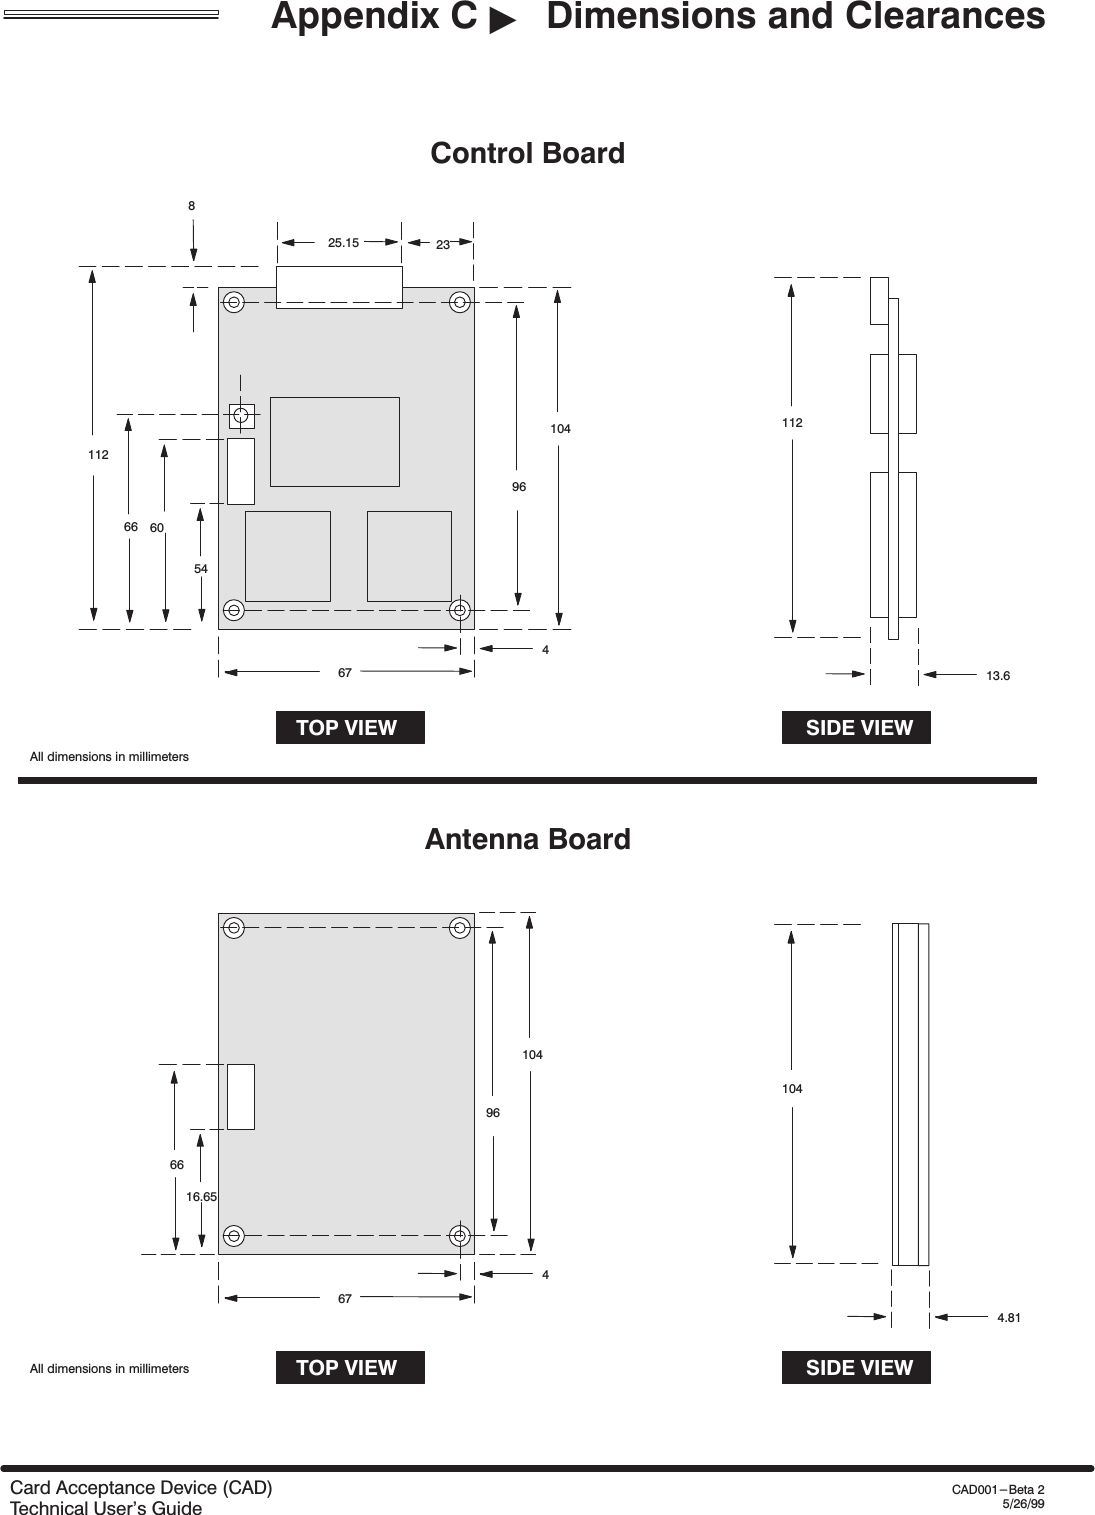 Appendix C &quot;Dimensions and ClearancesCard Acceptance Device (CAD)Technical User&apos;s GuideCAD001-Beta 25/26/999610446725.15 2381126654TOP VIEW SIDE VIEW11213.6Control Board9610446716.65TOP VIEW SIDE VIEW1044.81Antenna Board6660All dimensions in millimetersAll dimensions in millimeters